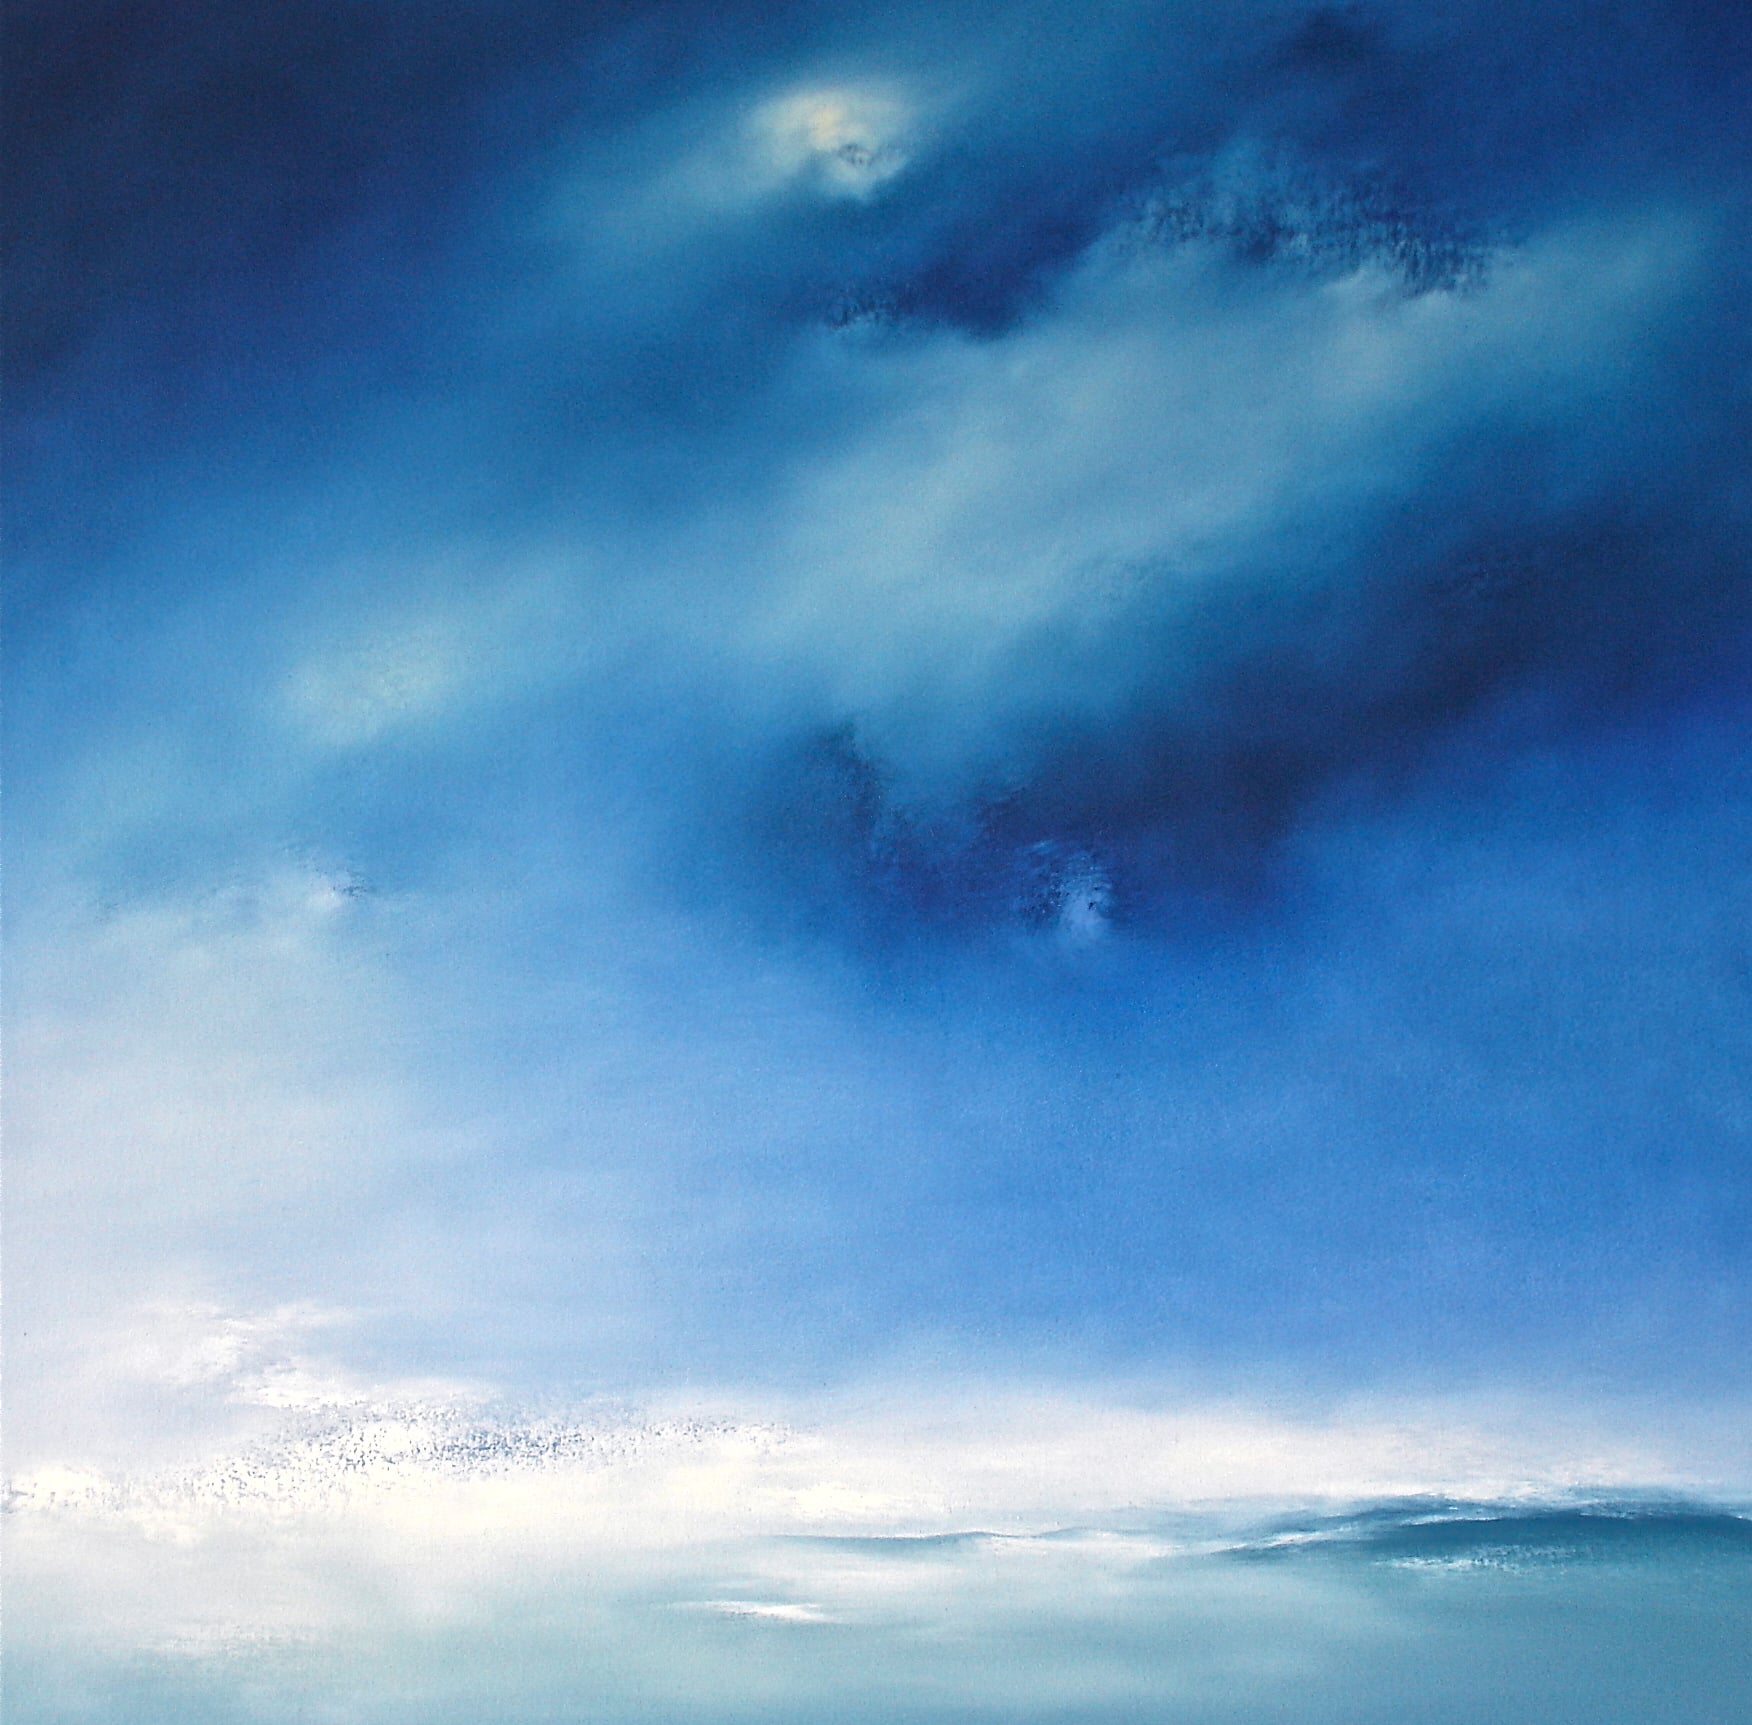 "Essence 16" Oil on Canvas, 36"x36" by Anne-Marie Mulligan